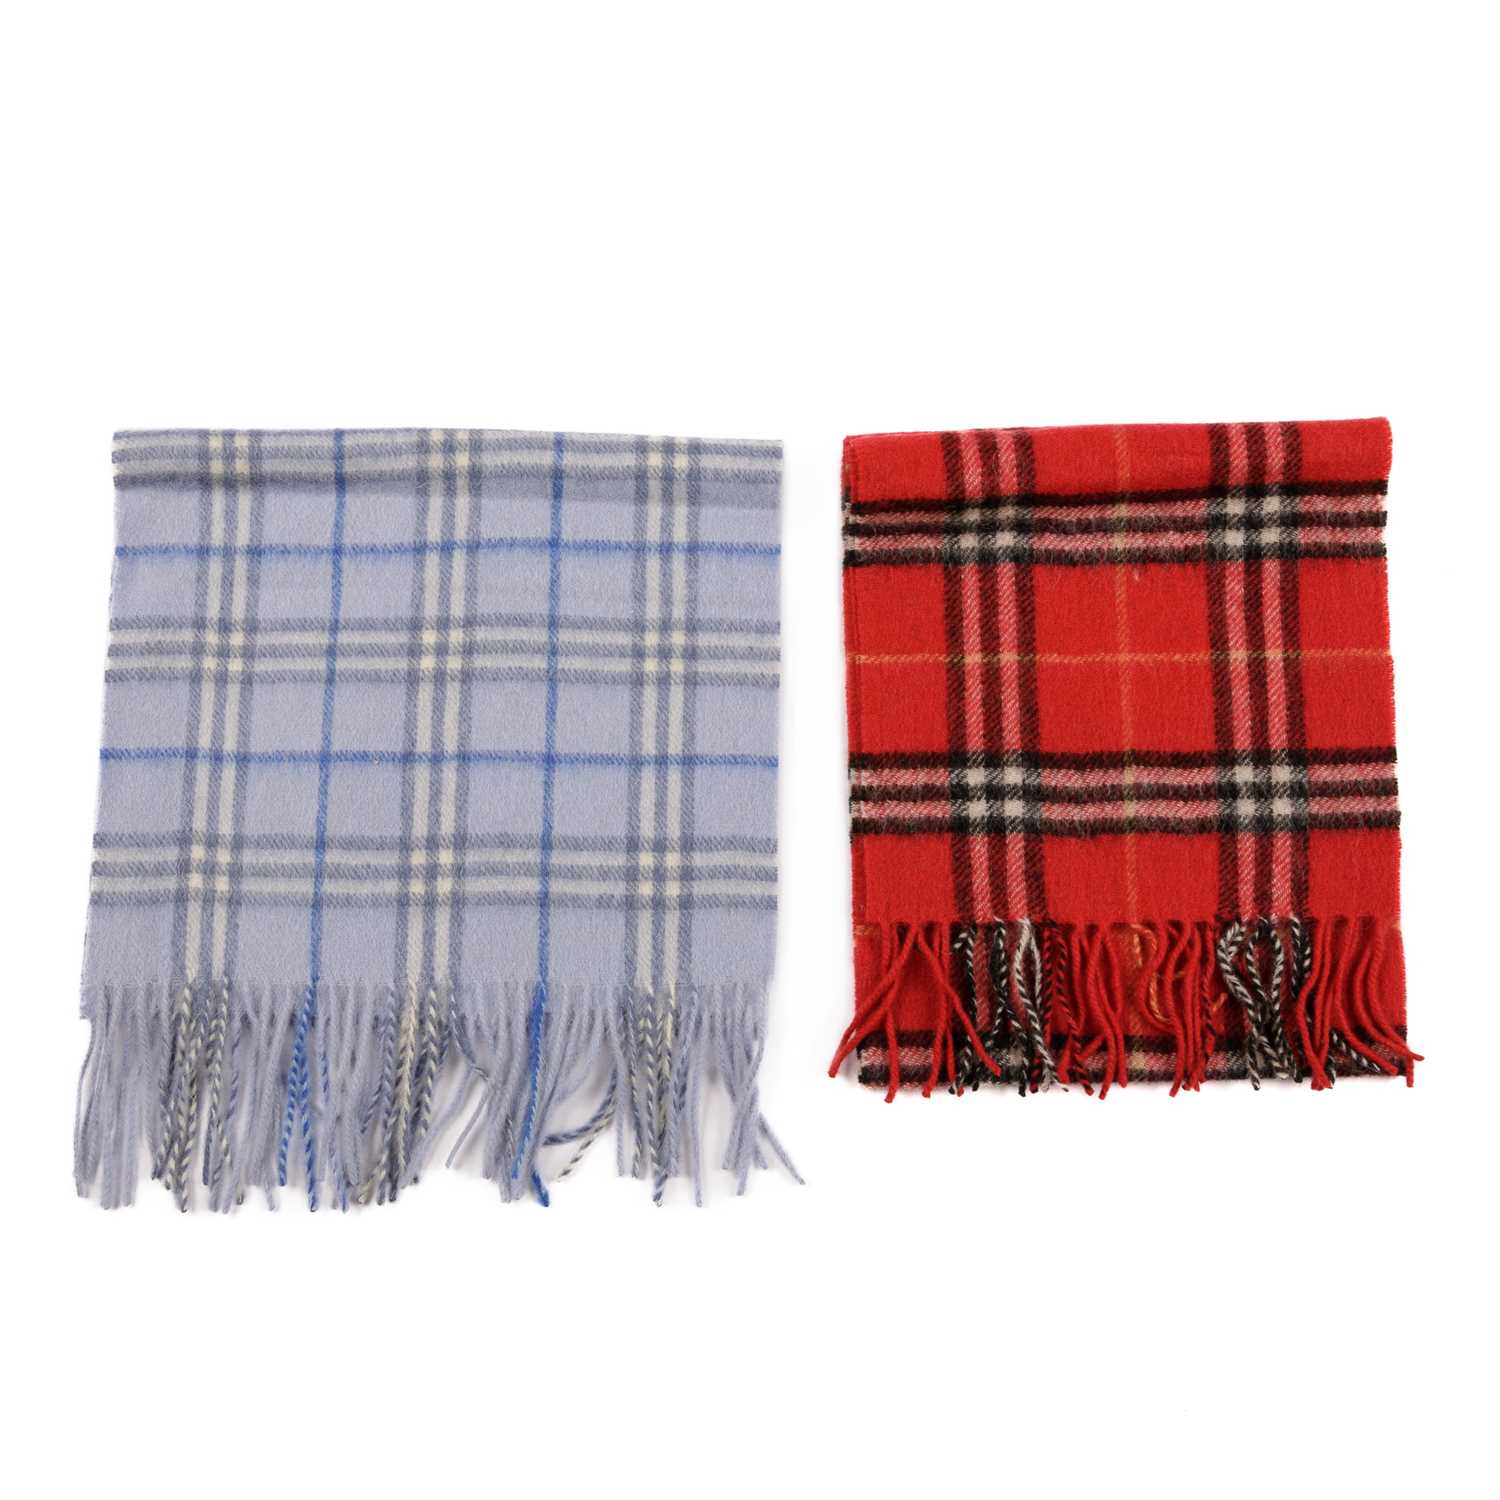 Burberry, two Nova Check lambswool scarves, to include a light blue scarf and a red scarf, both with